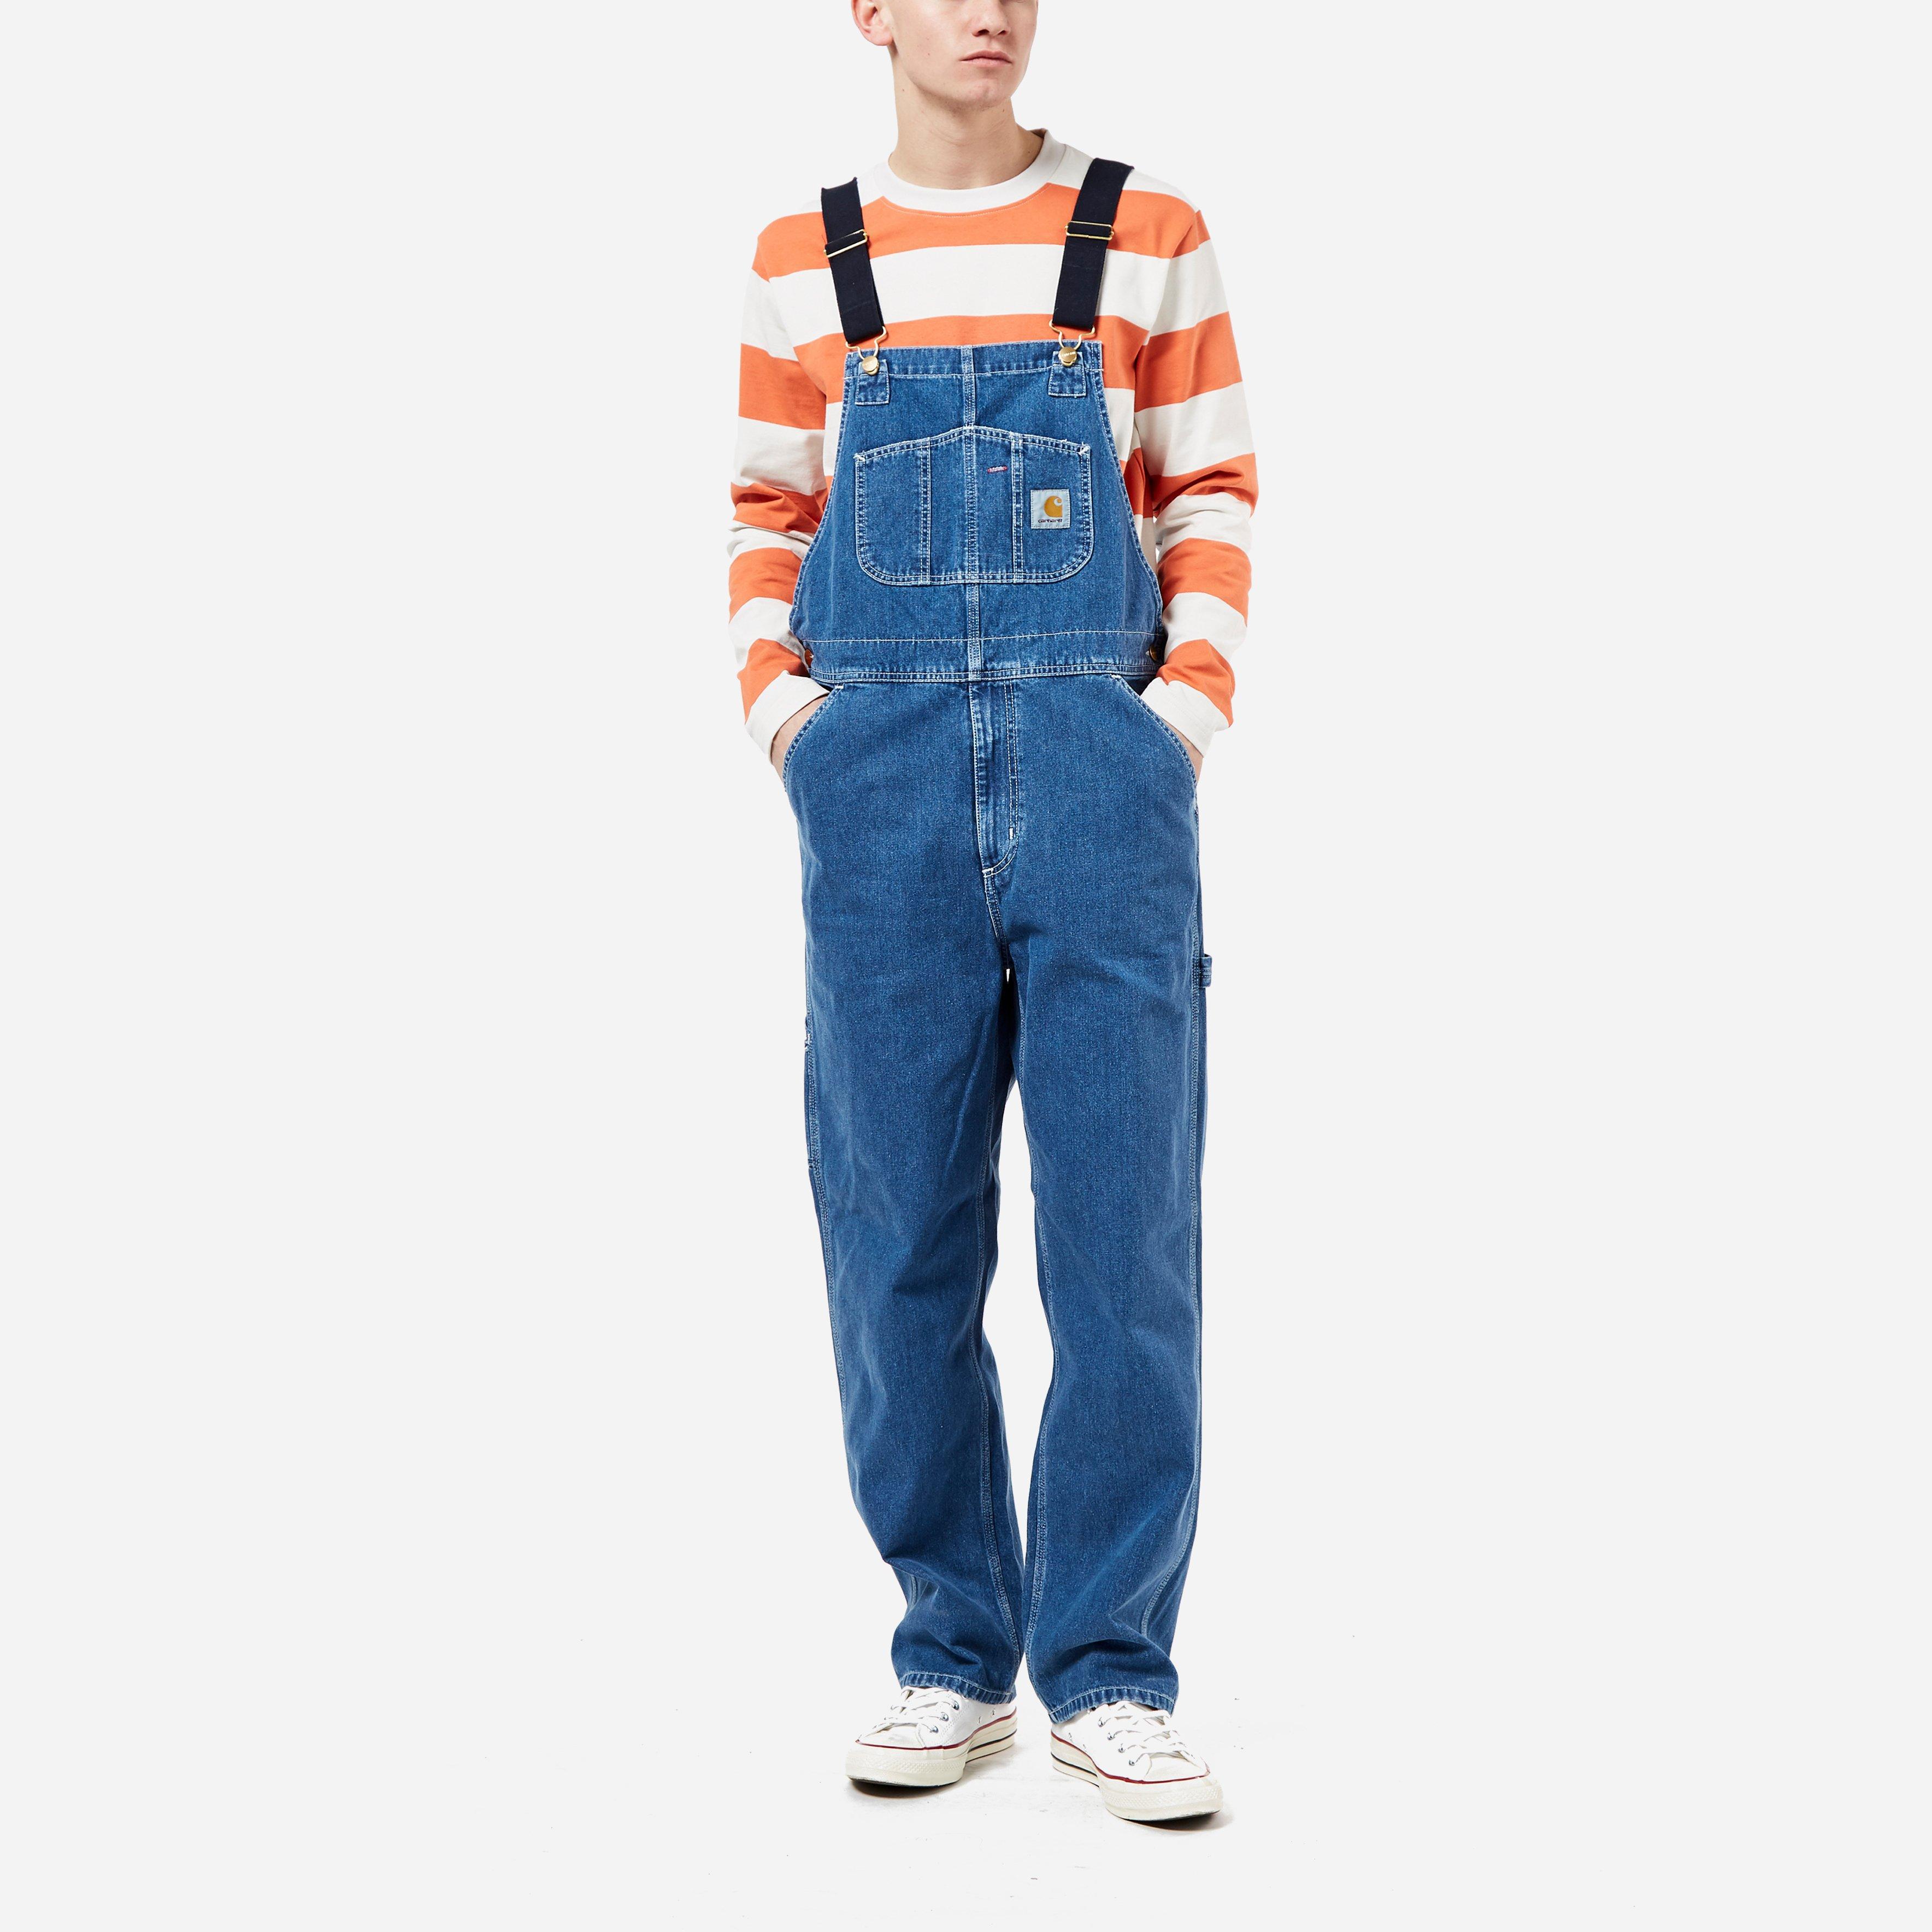 Carhartt WIP Denim Stone Washed Bib Overall in Blue for Men - Lyst